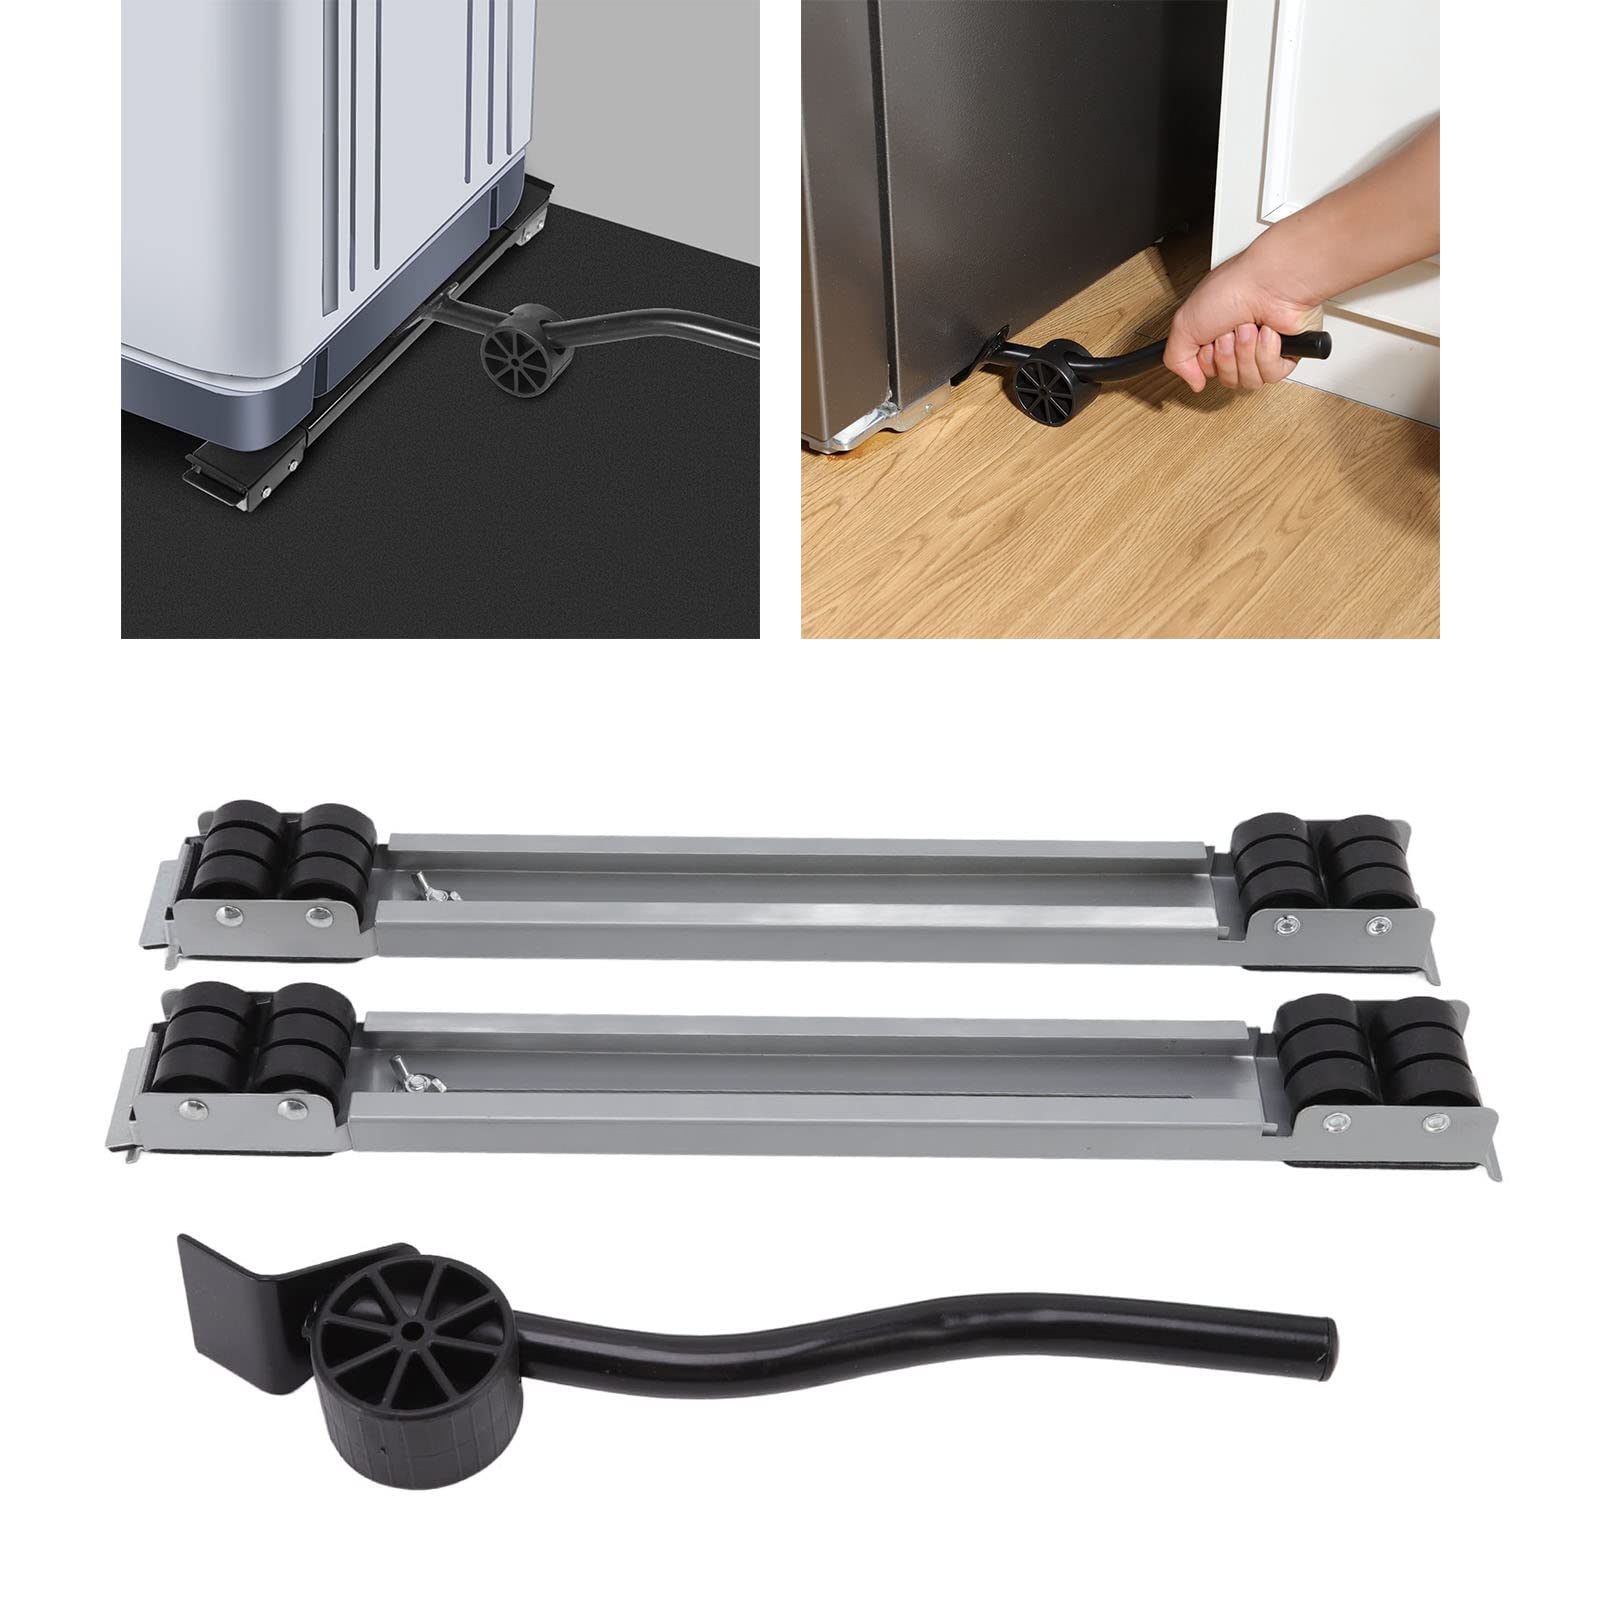 Tnfeeon Appliance Roller Base Mover Extensible, Heavy Duty Extendable Appliance Rollers for Washer Dryer Refrigerator